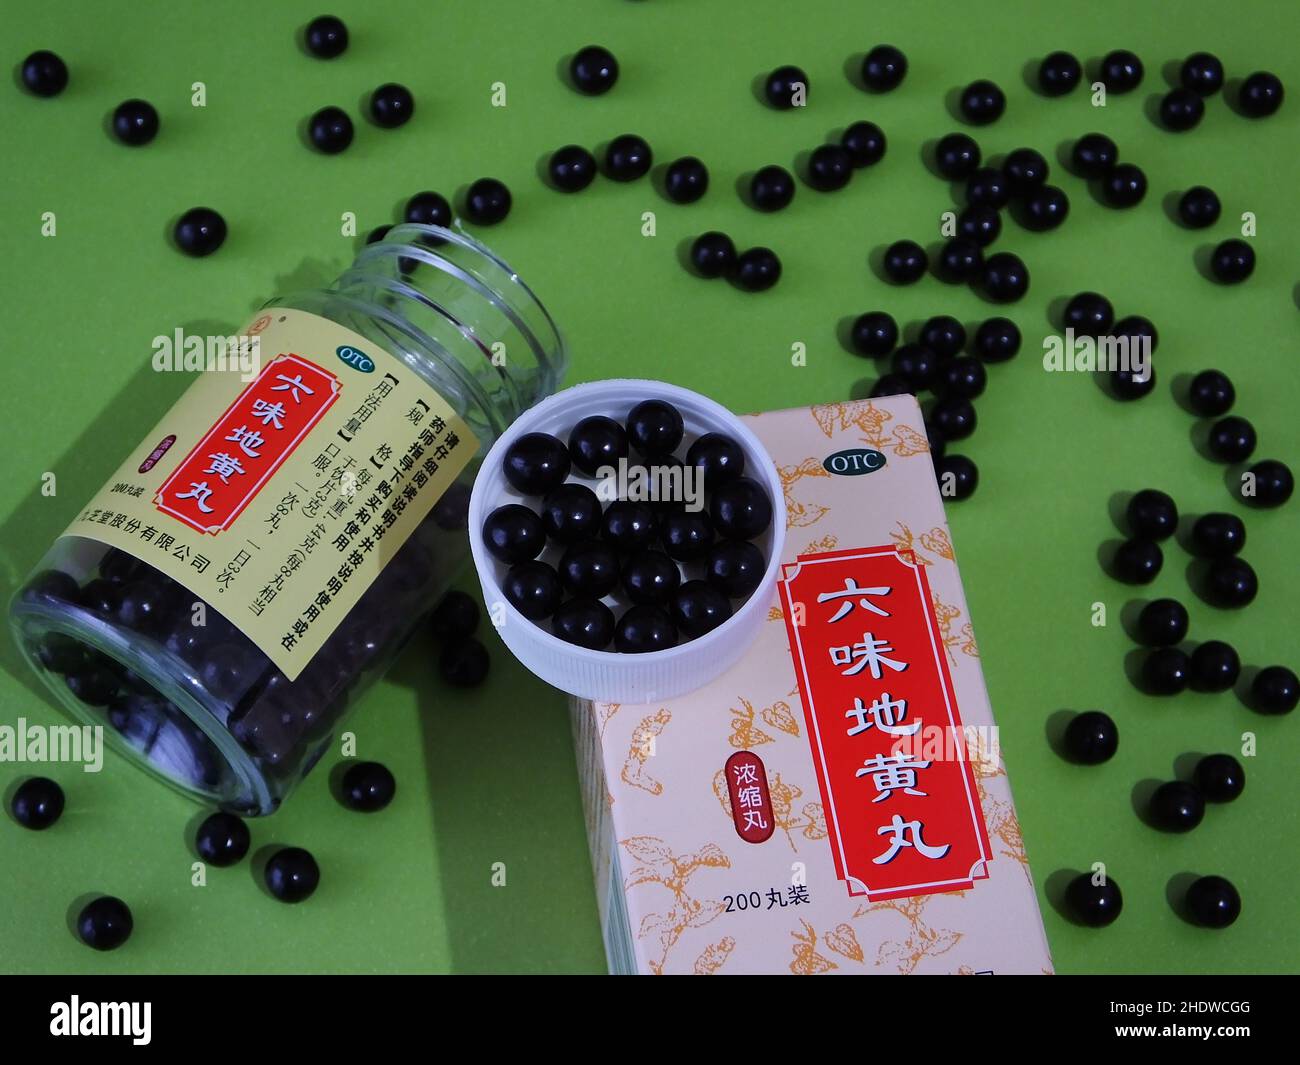 YICHANG, CHINA - JANUARY 7, 2022 - A citizen shows his purchased Chinese patent medicine in Yichang, Hubei Province, China, Jan 7, 2022. Stock Photo